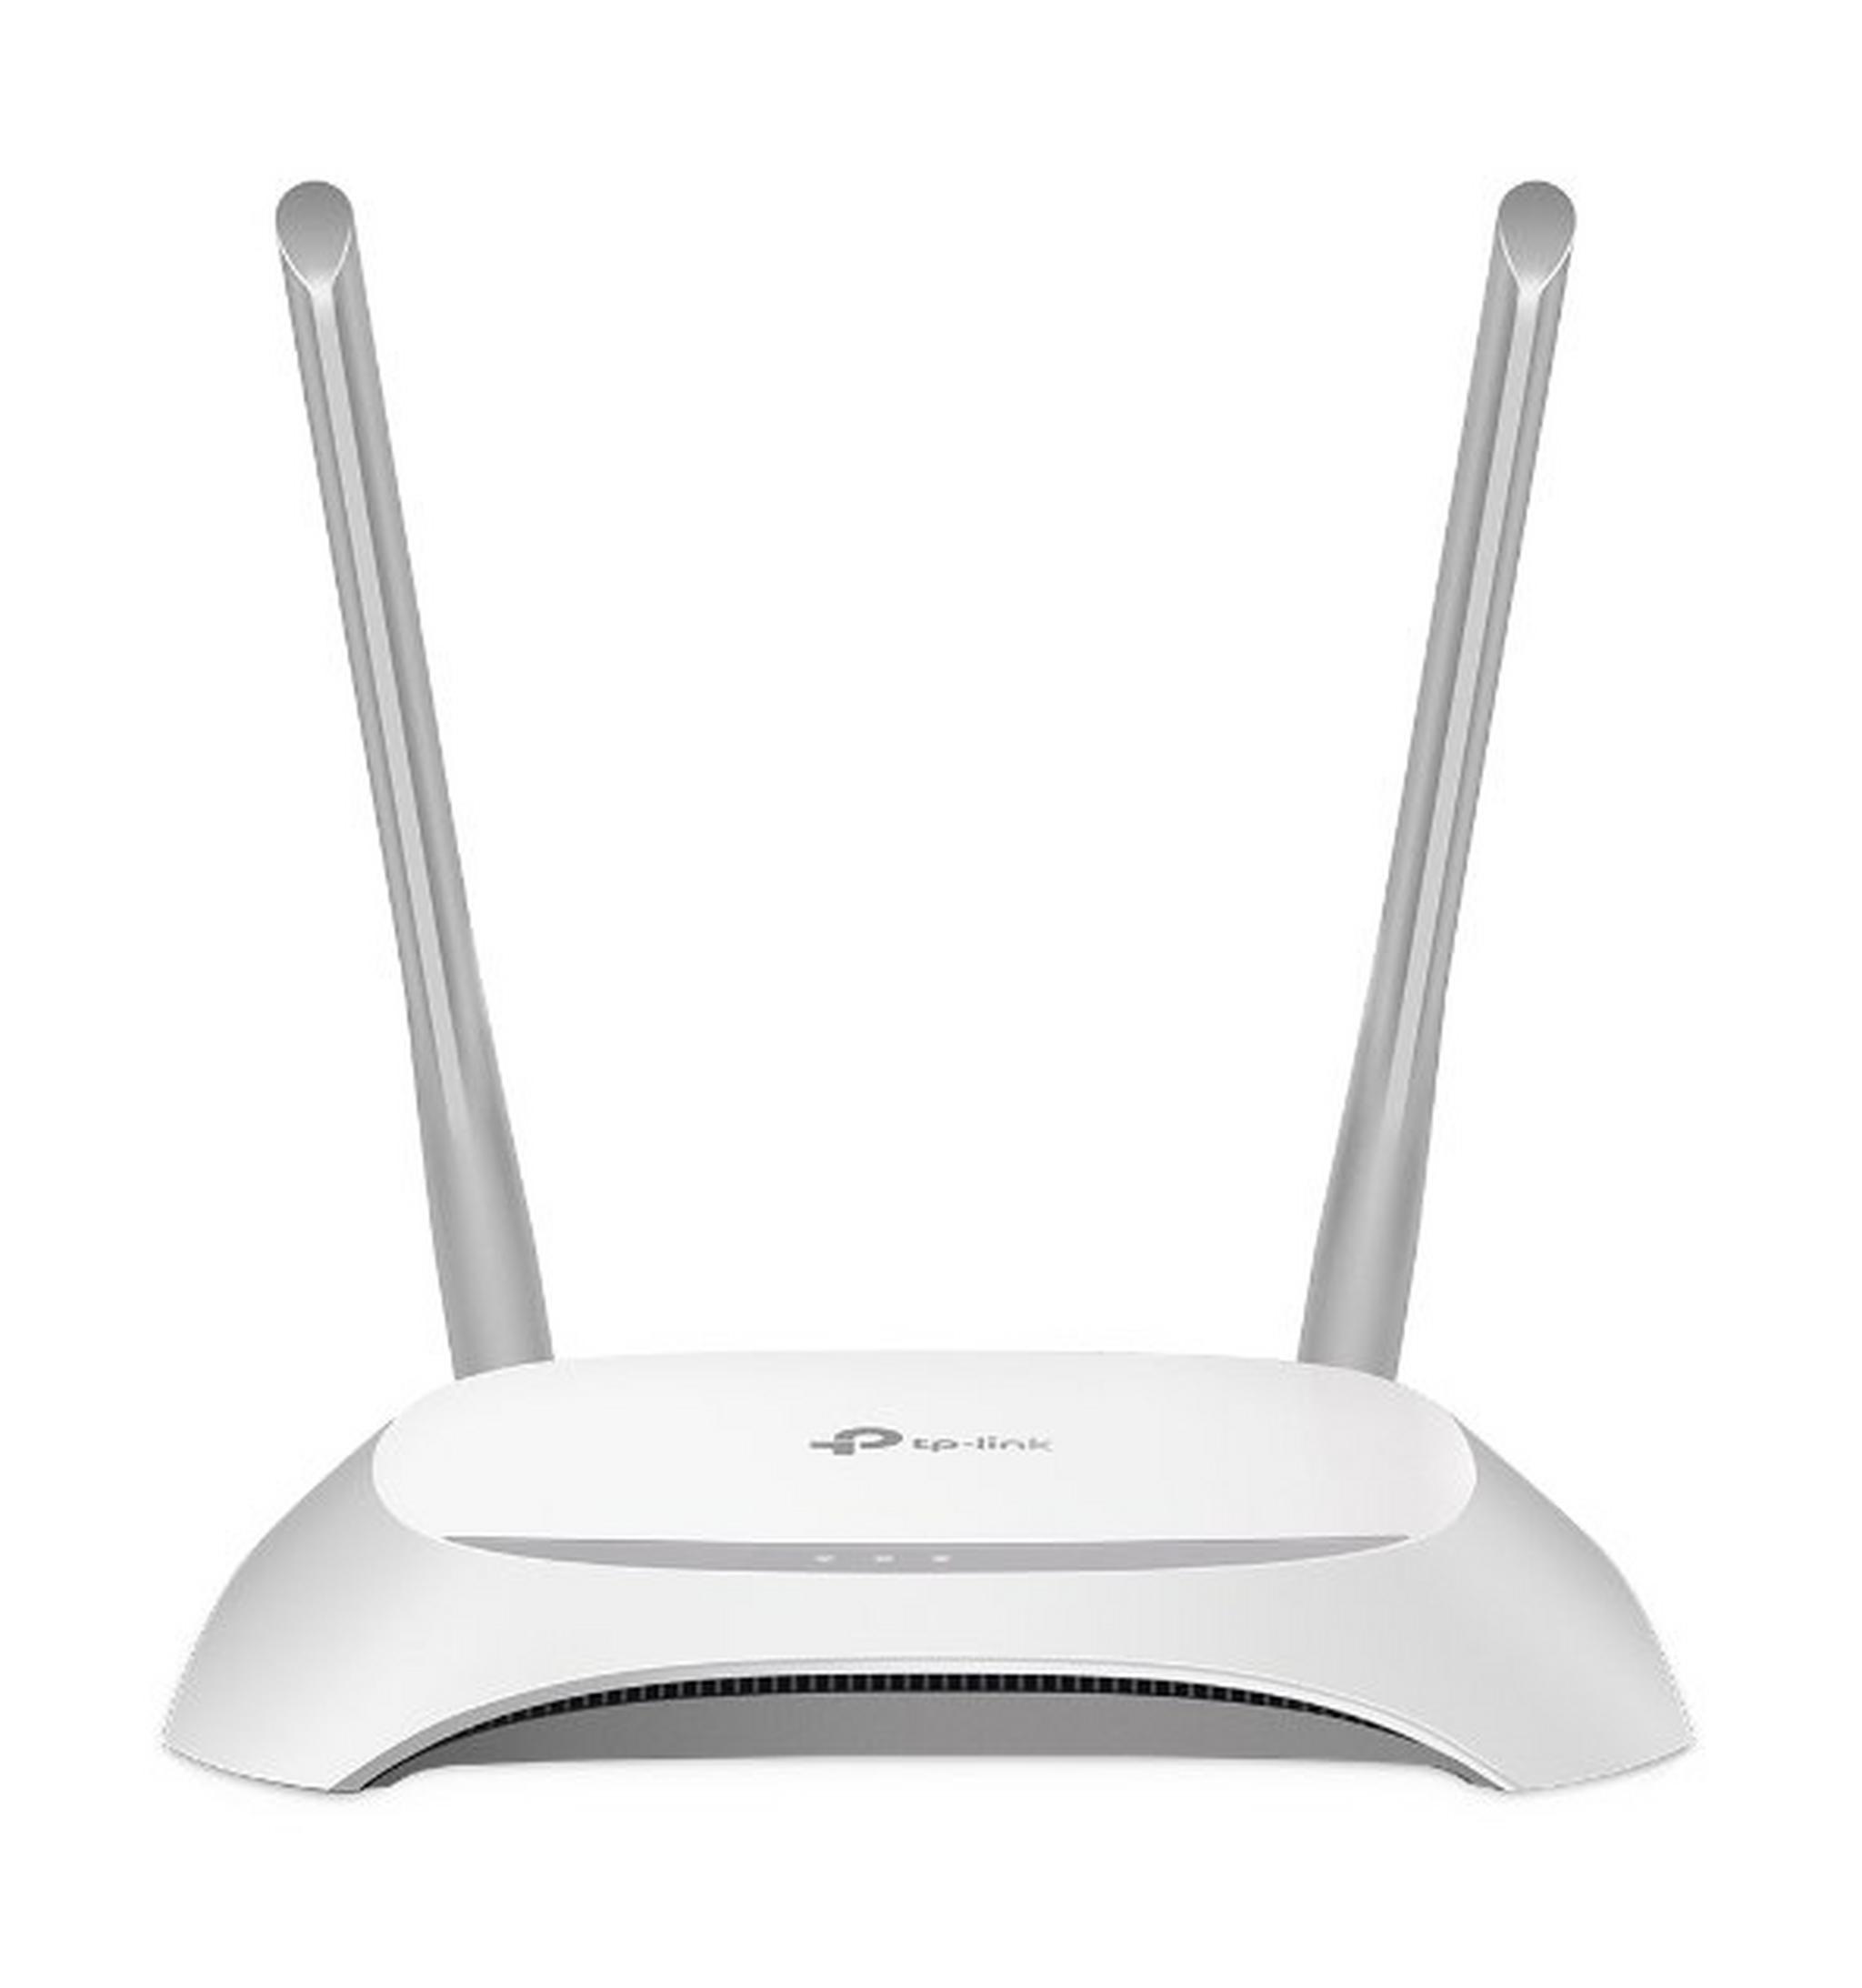 TP-Link WR840N 300 Mbps Wireless Network Router